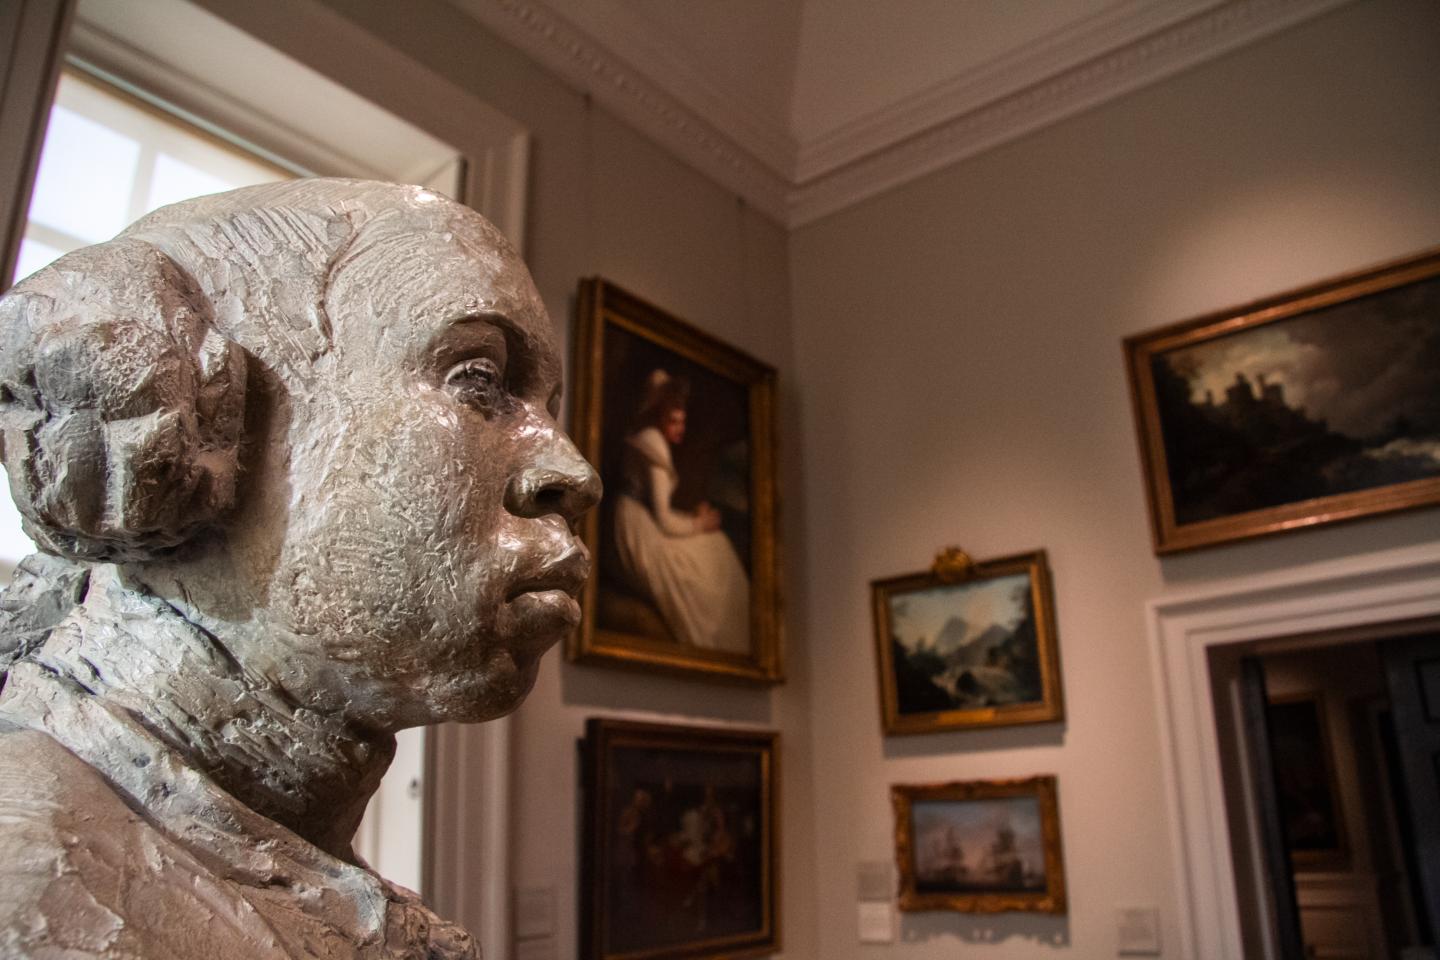 Sculpture of a man viewed from the side, with paintings on display on the wall in the background